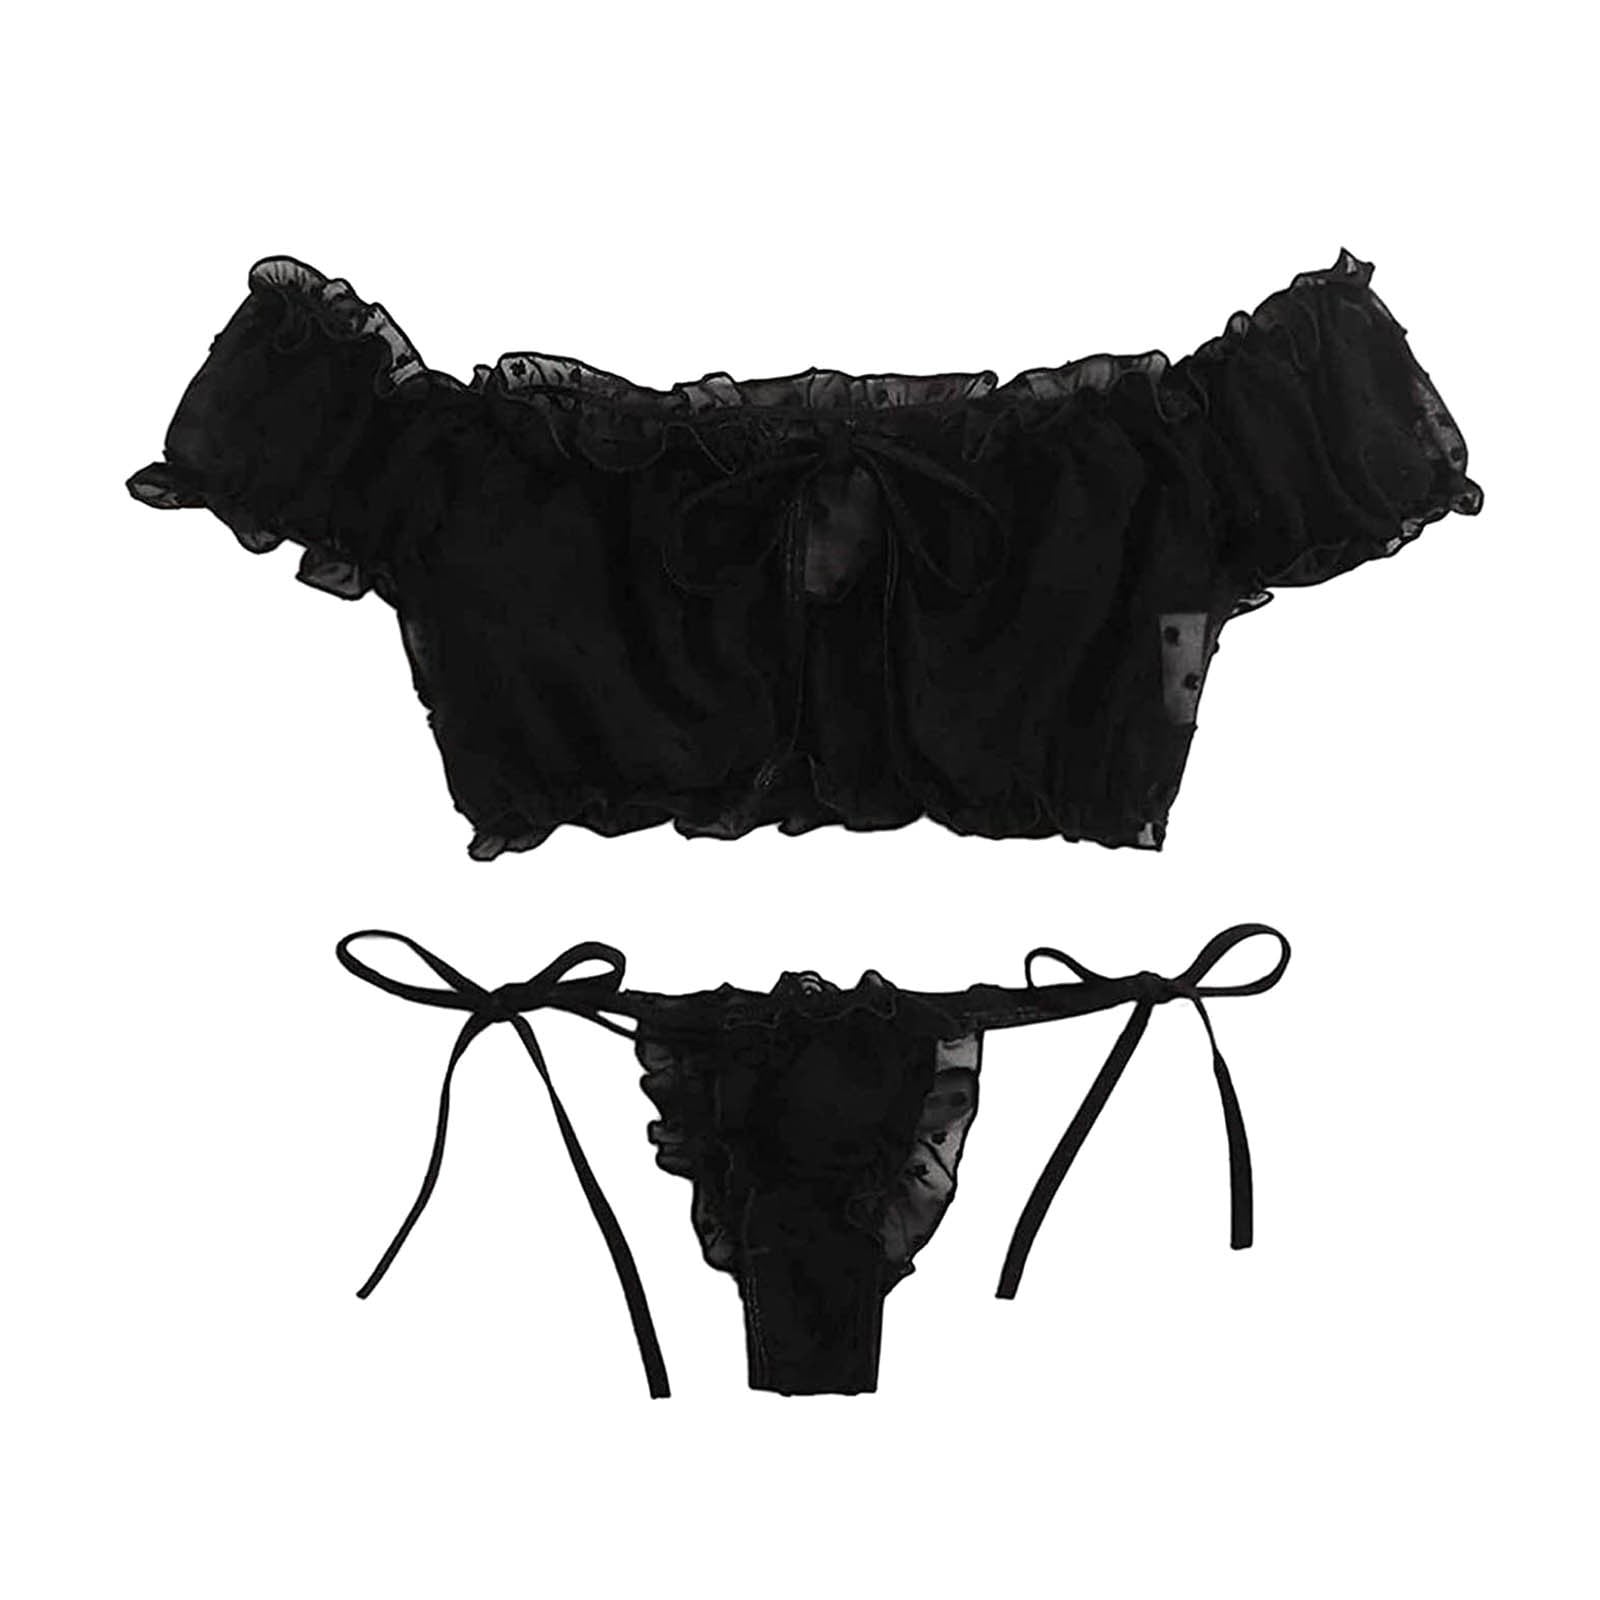 Black Lace Mousse Half Cup Bra Panty Garter Set With Transparent Panties  And Garters Sexy Lounge Womens Underwear In Deep V Design From Xn129,  $15.98